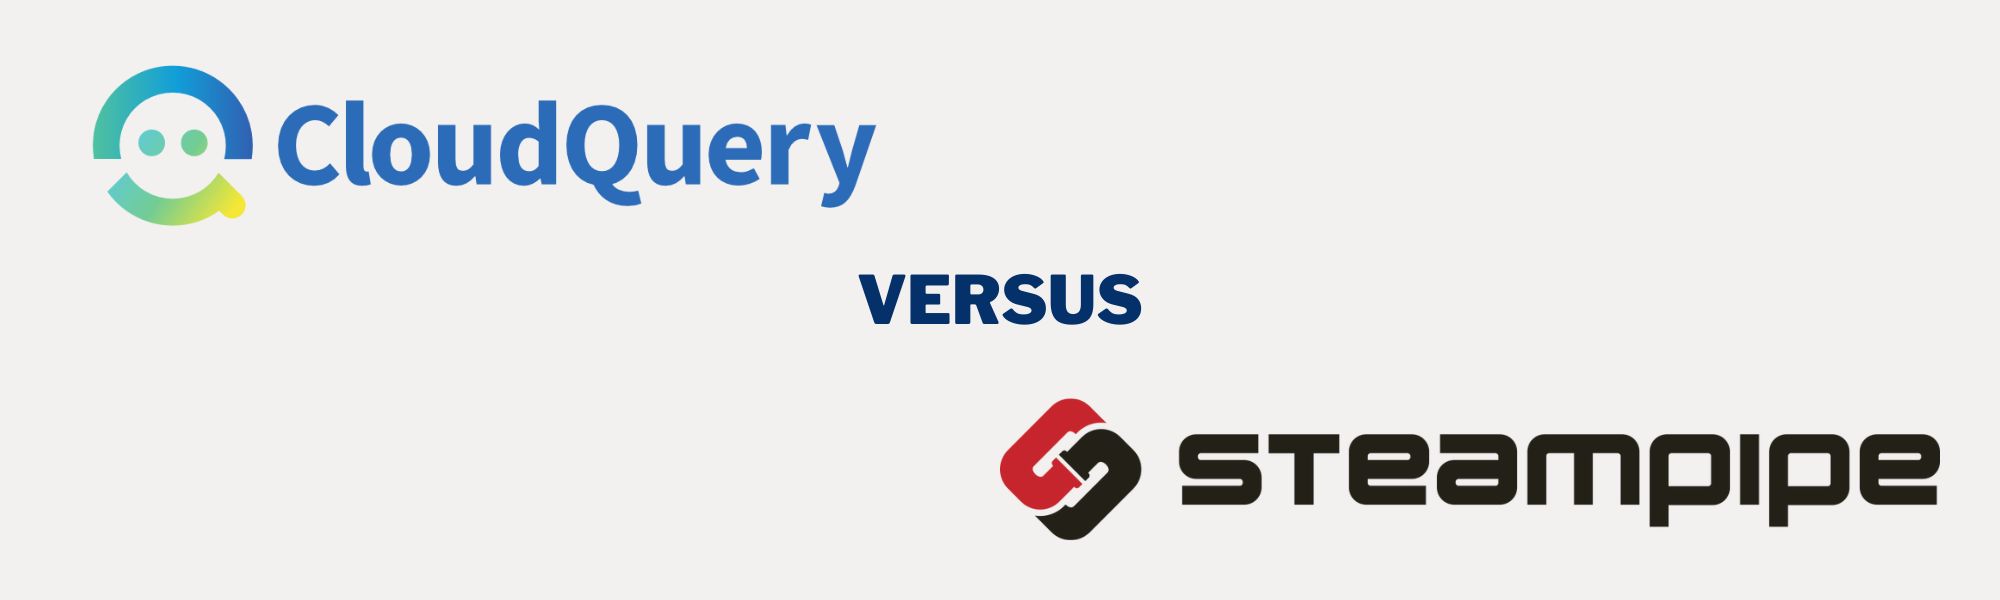 /cloudquery-vs-steampipe/cover-image.jpg